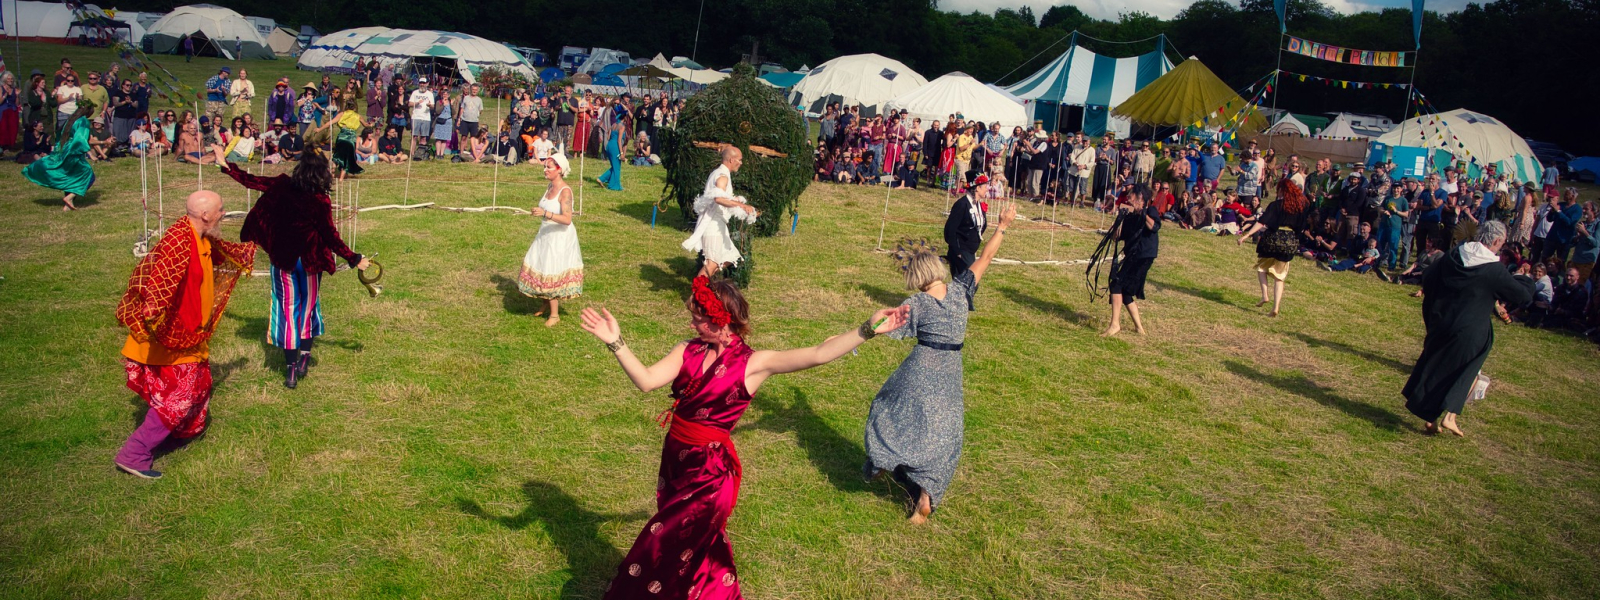 People dancing in a field at Buddhafield Festival 